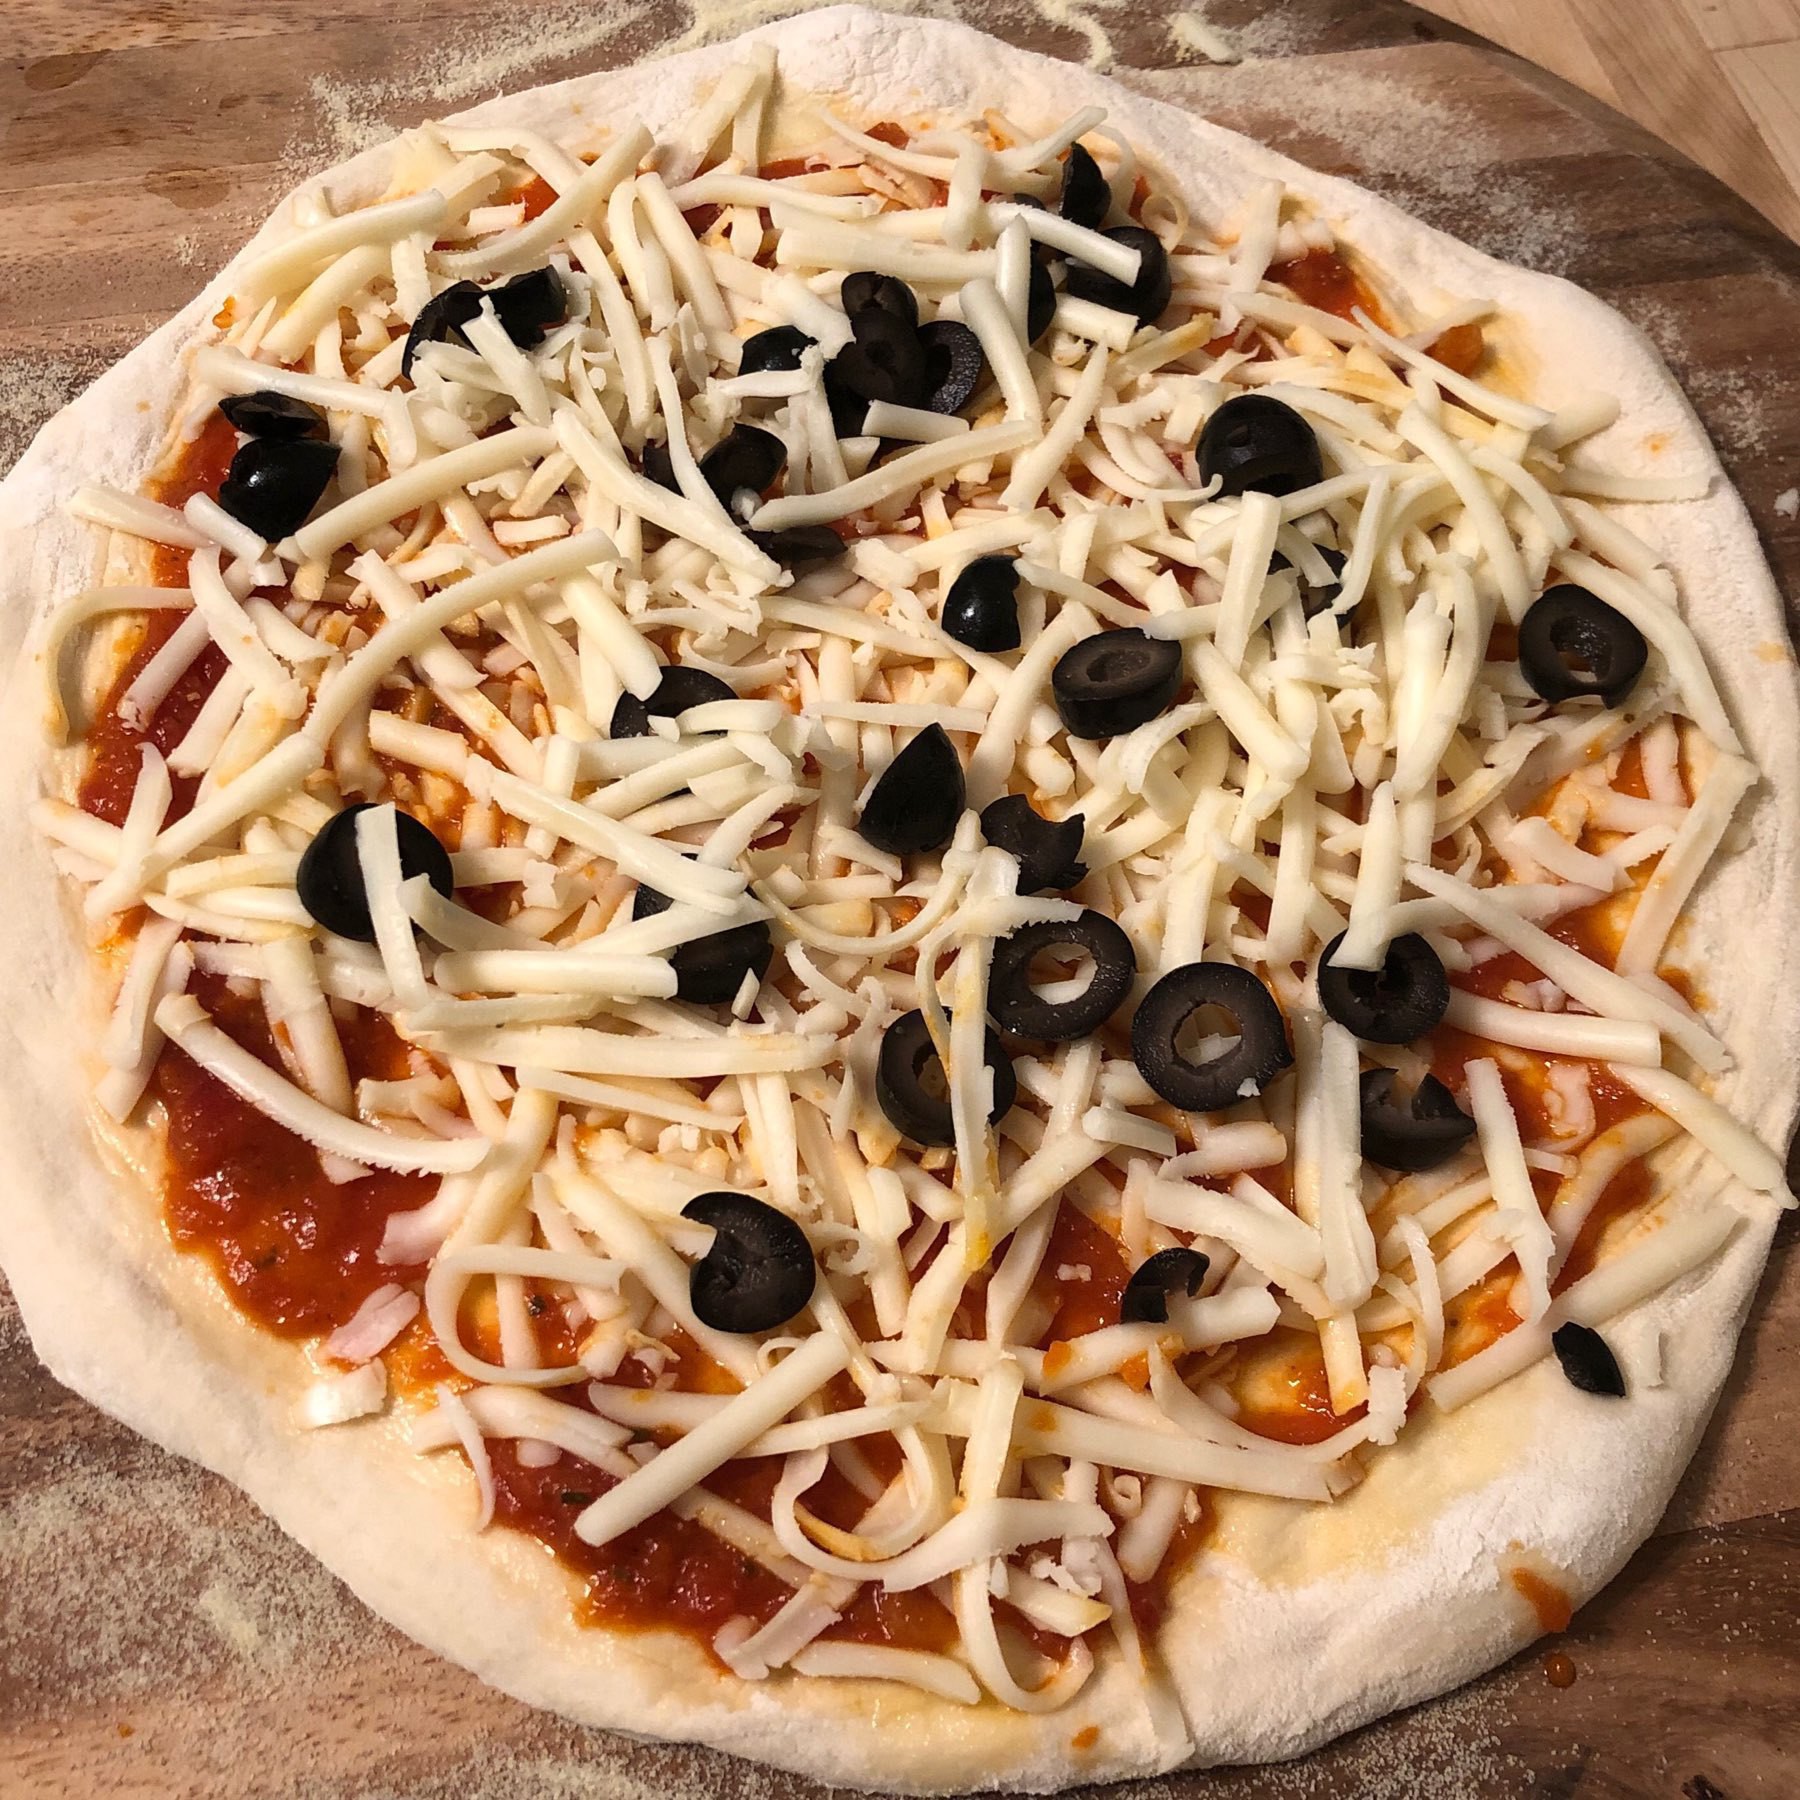 Raw pizza with grated mozzarella and black olives.